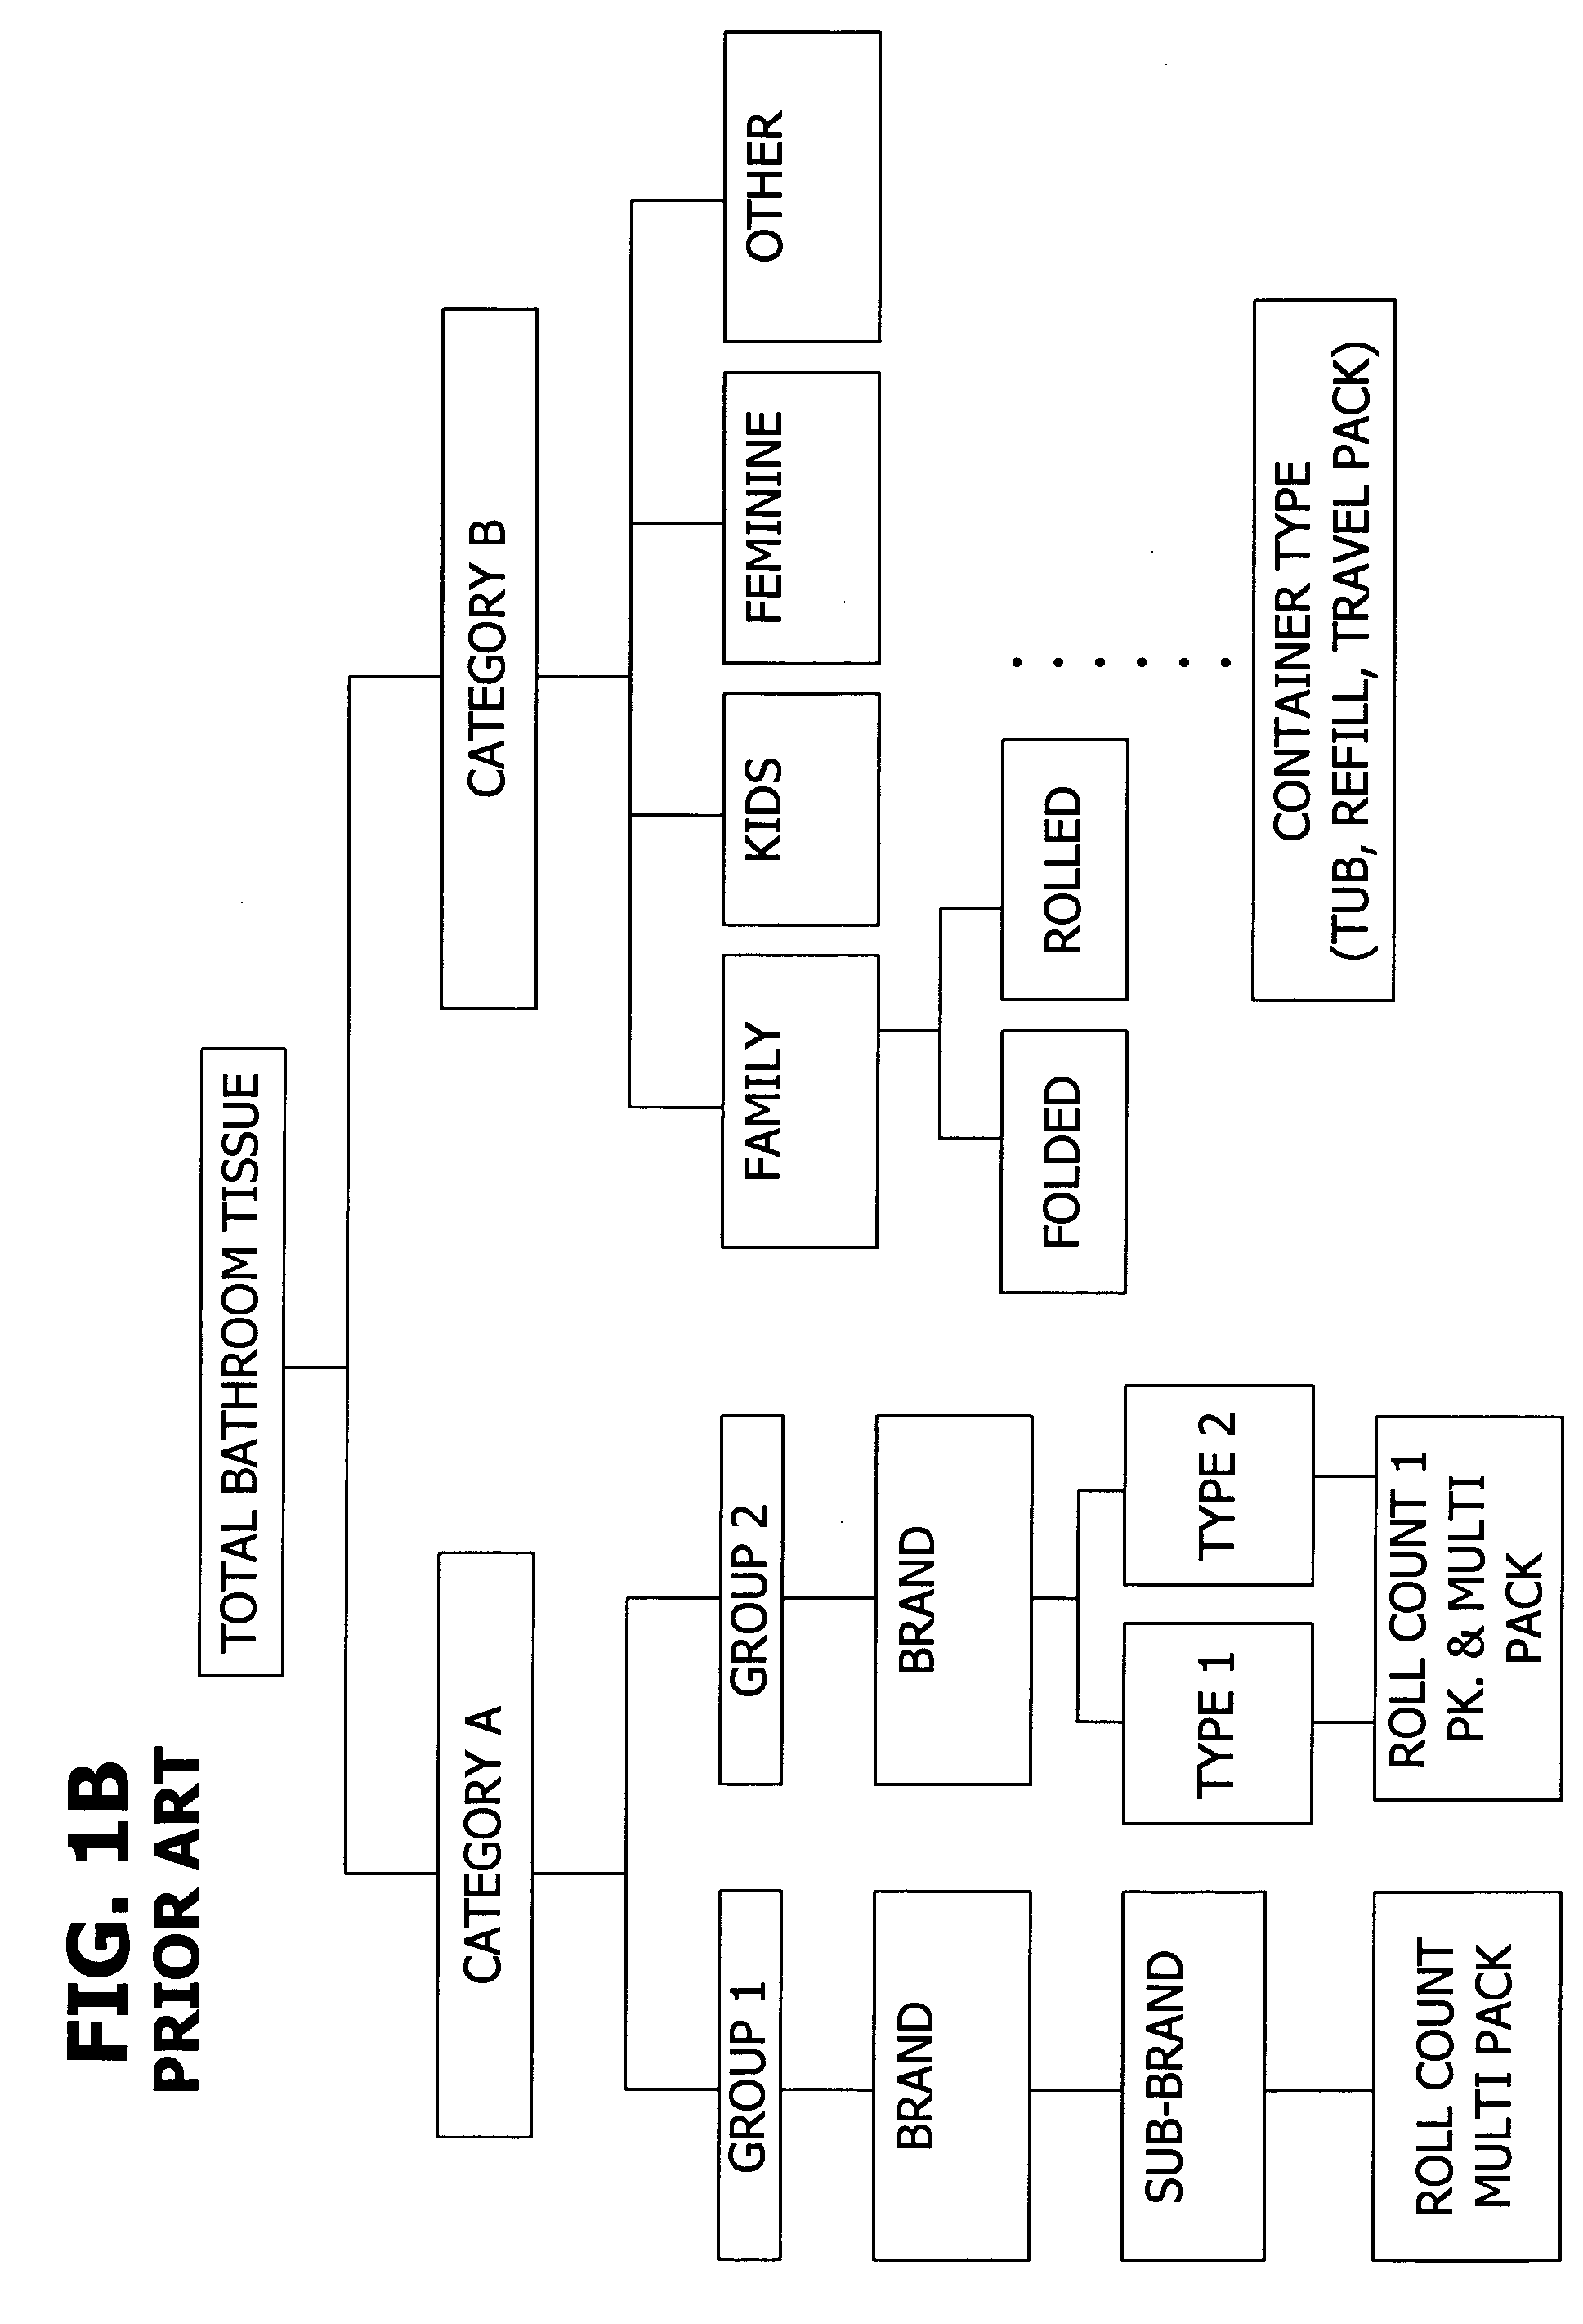 Method and system for determining product assortment for retail placement